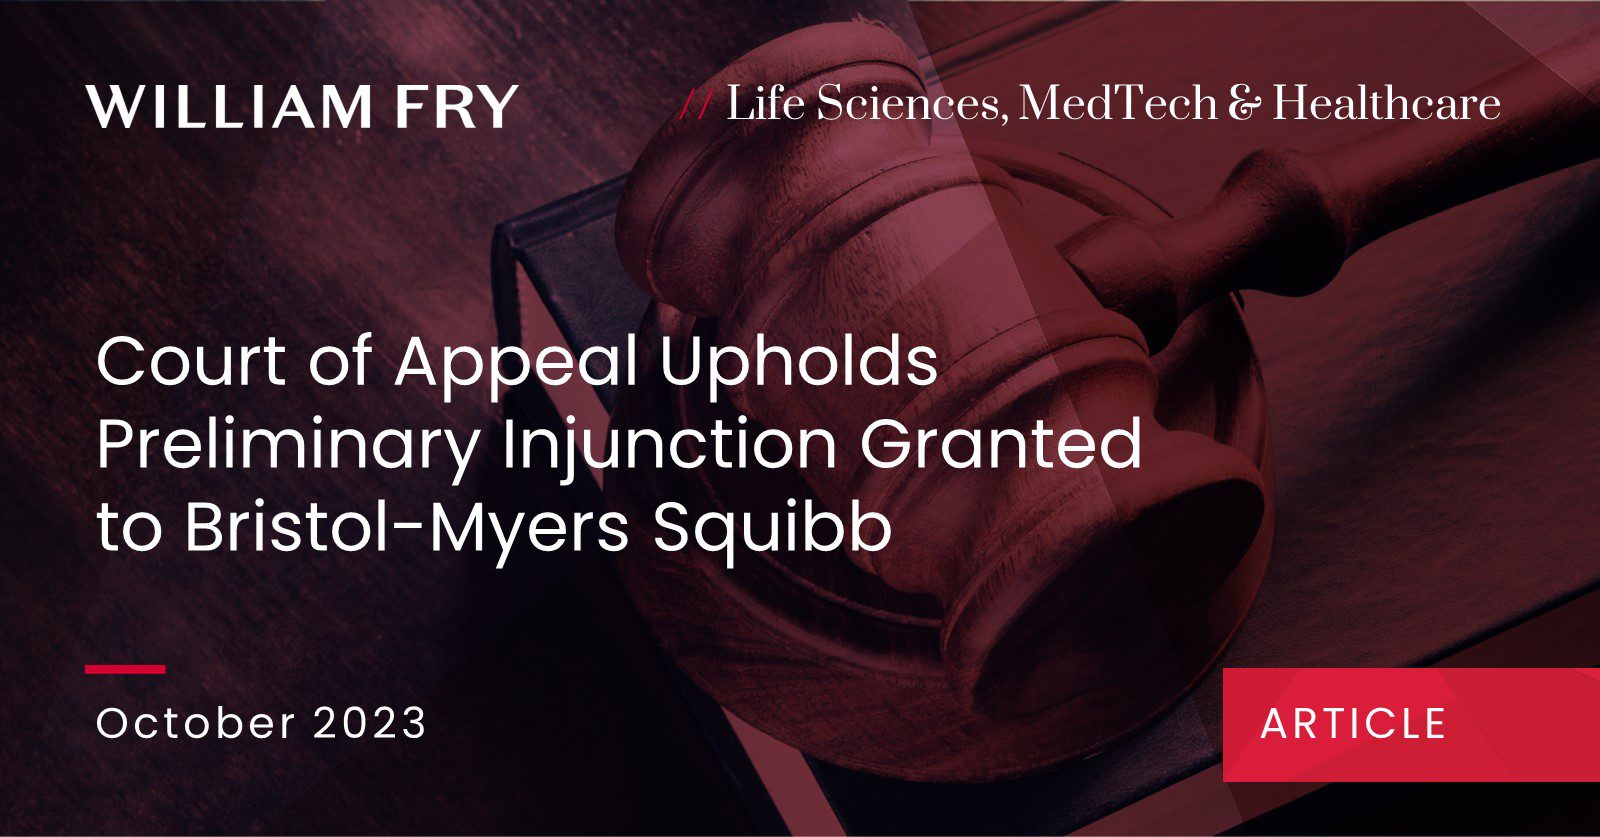 Court of Appeal Upholds Preliminary Injunction Granted to Bristol-Myers Squibb